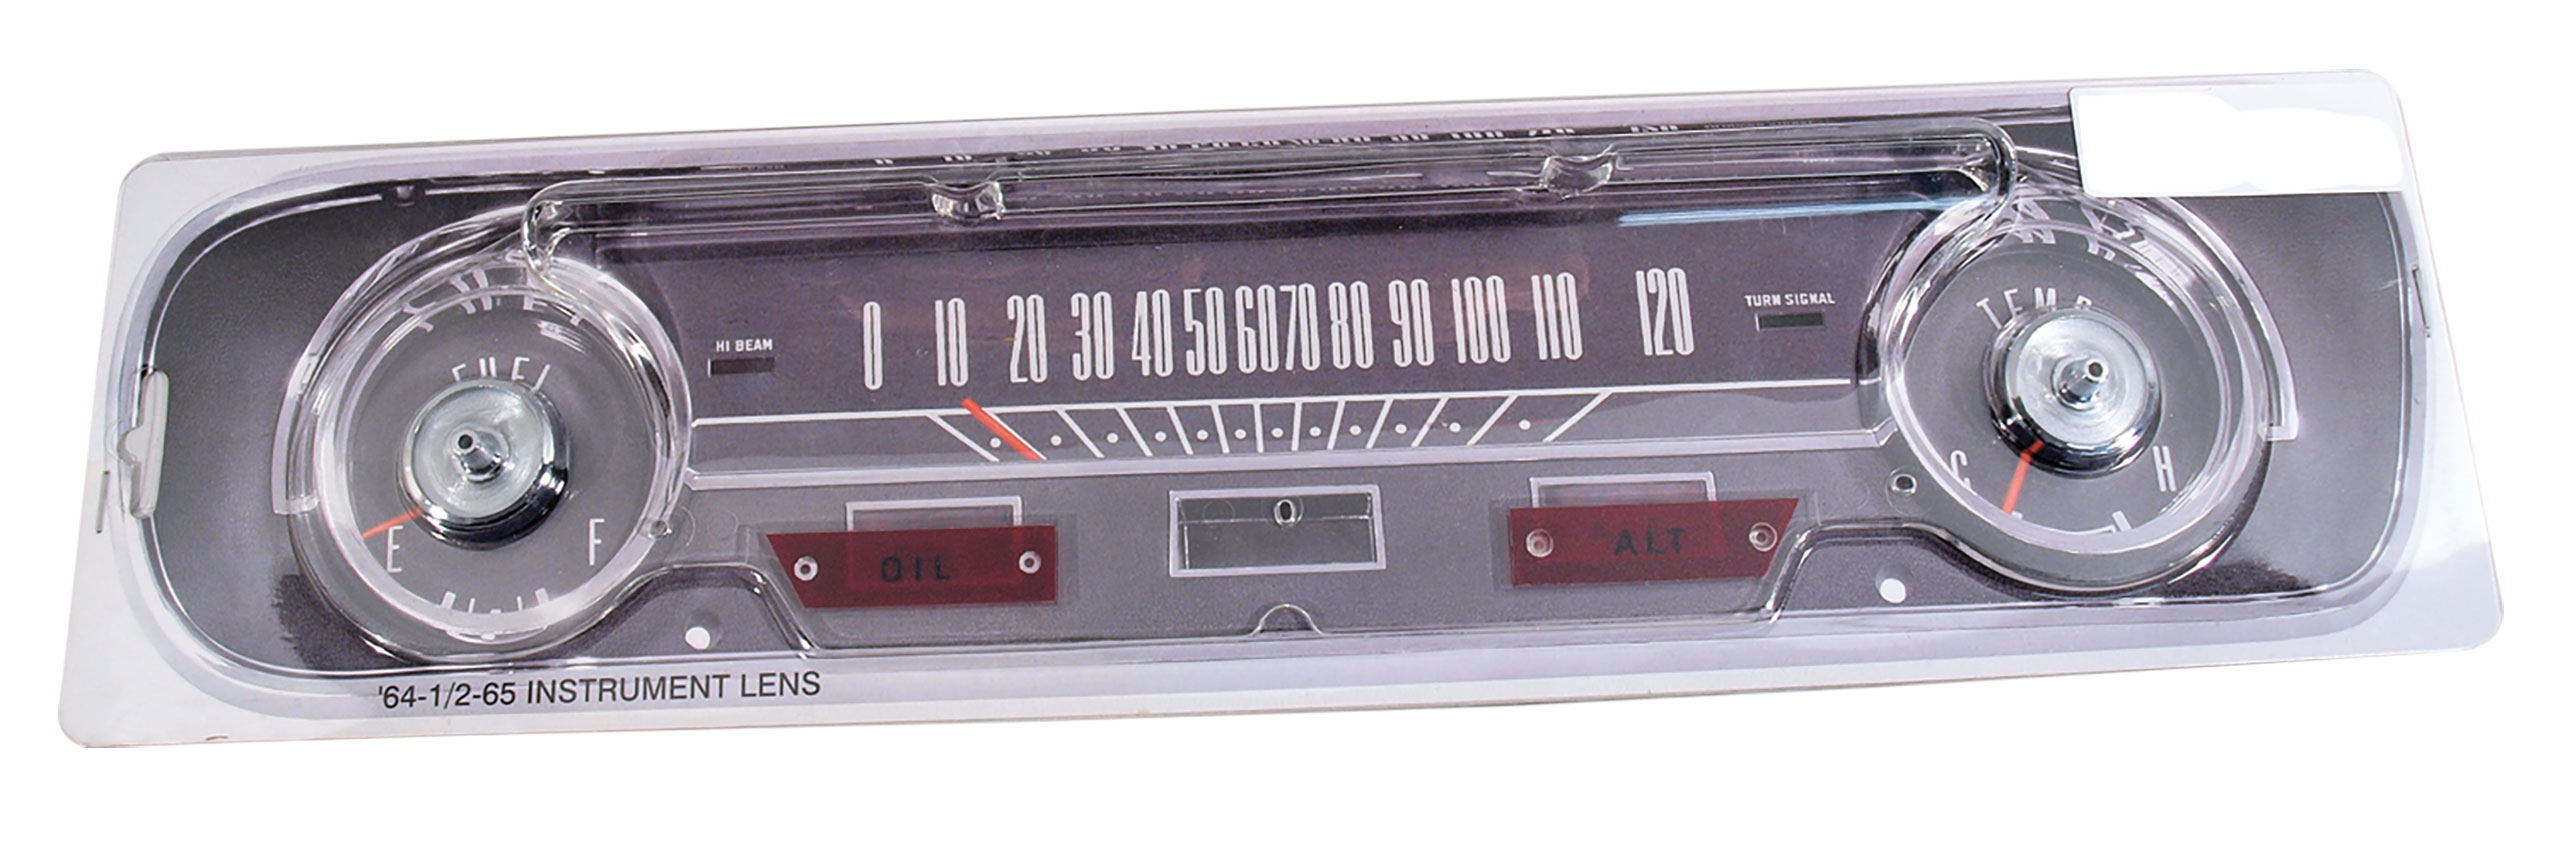 First Generation 1965 Ford Mustang Instrument Gauge Lens - Late 1965 Alternator Style - CA